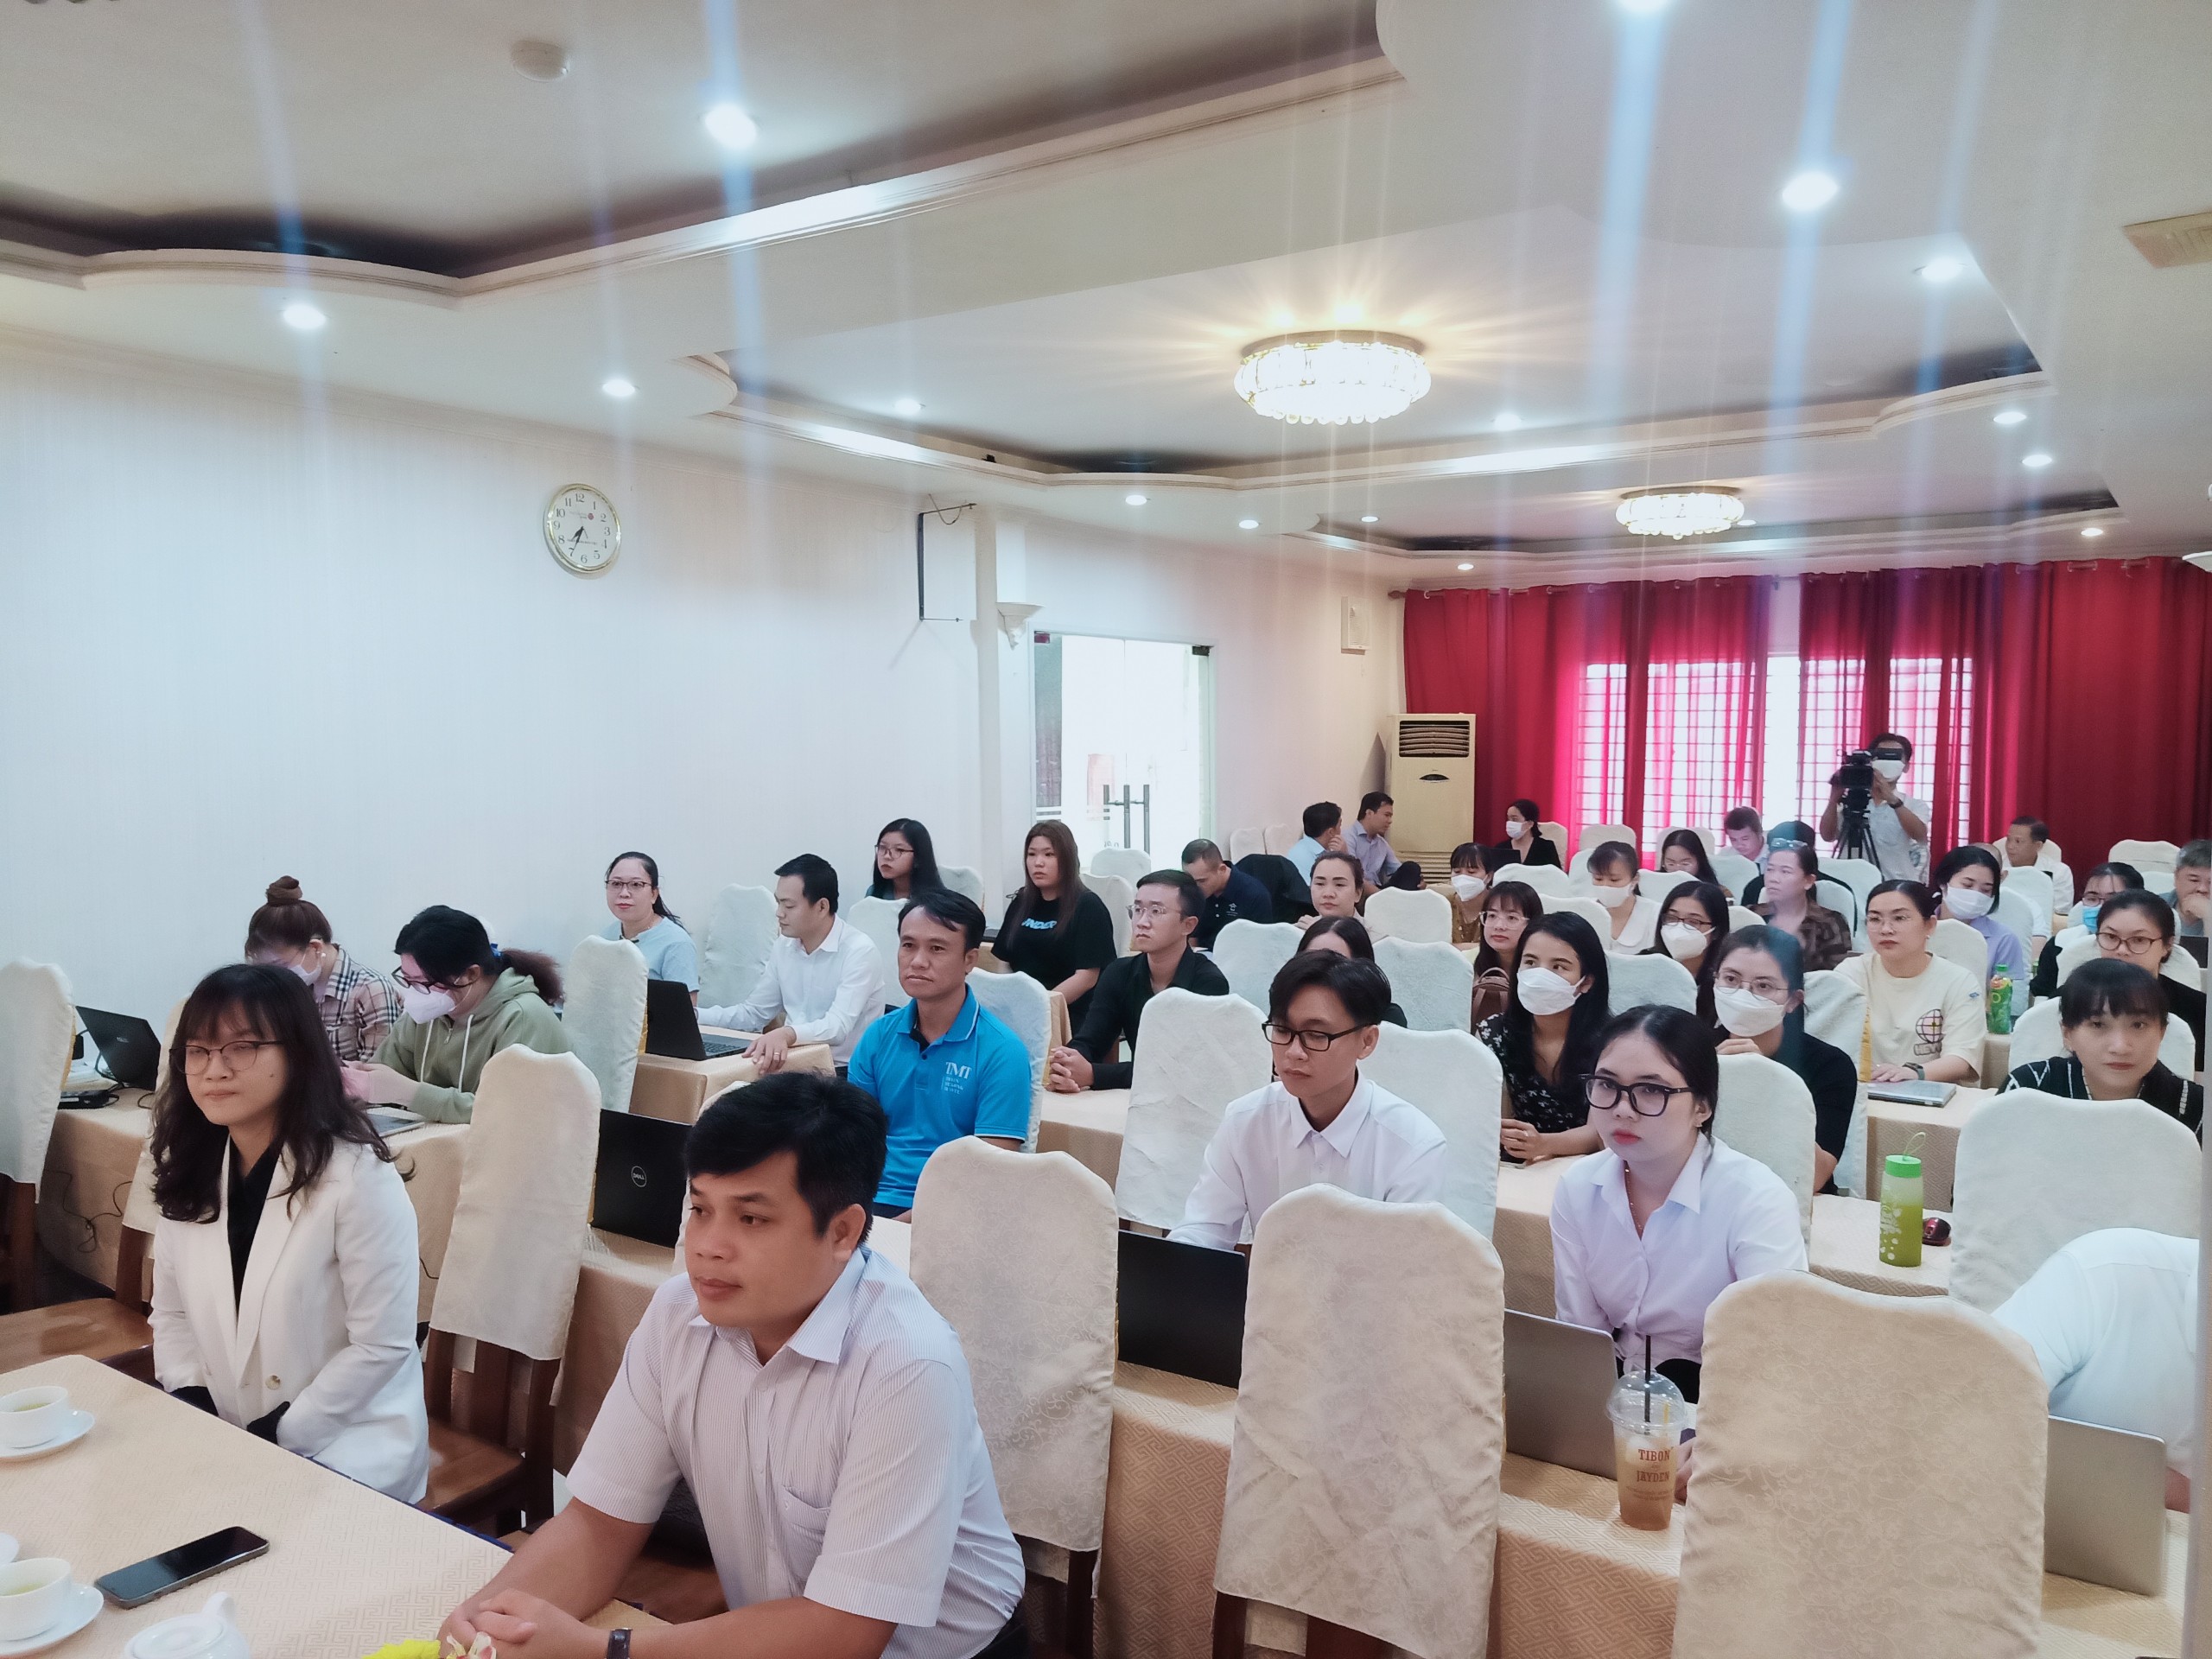 An Giang Investment and Trade Promotion Center trains "Skills to build effective content marketing on social networks"